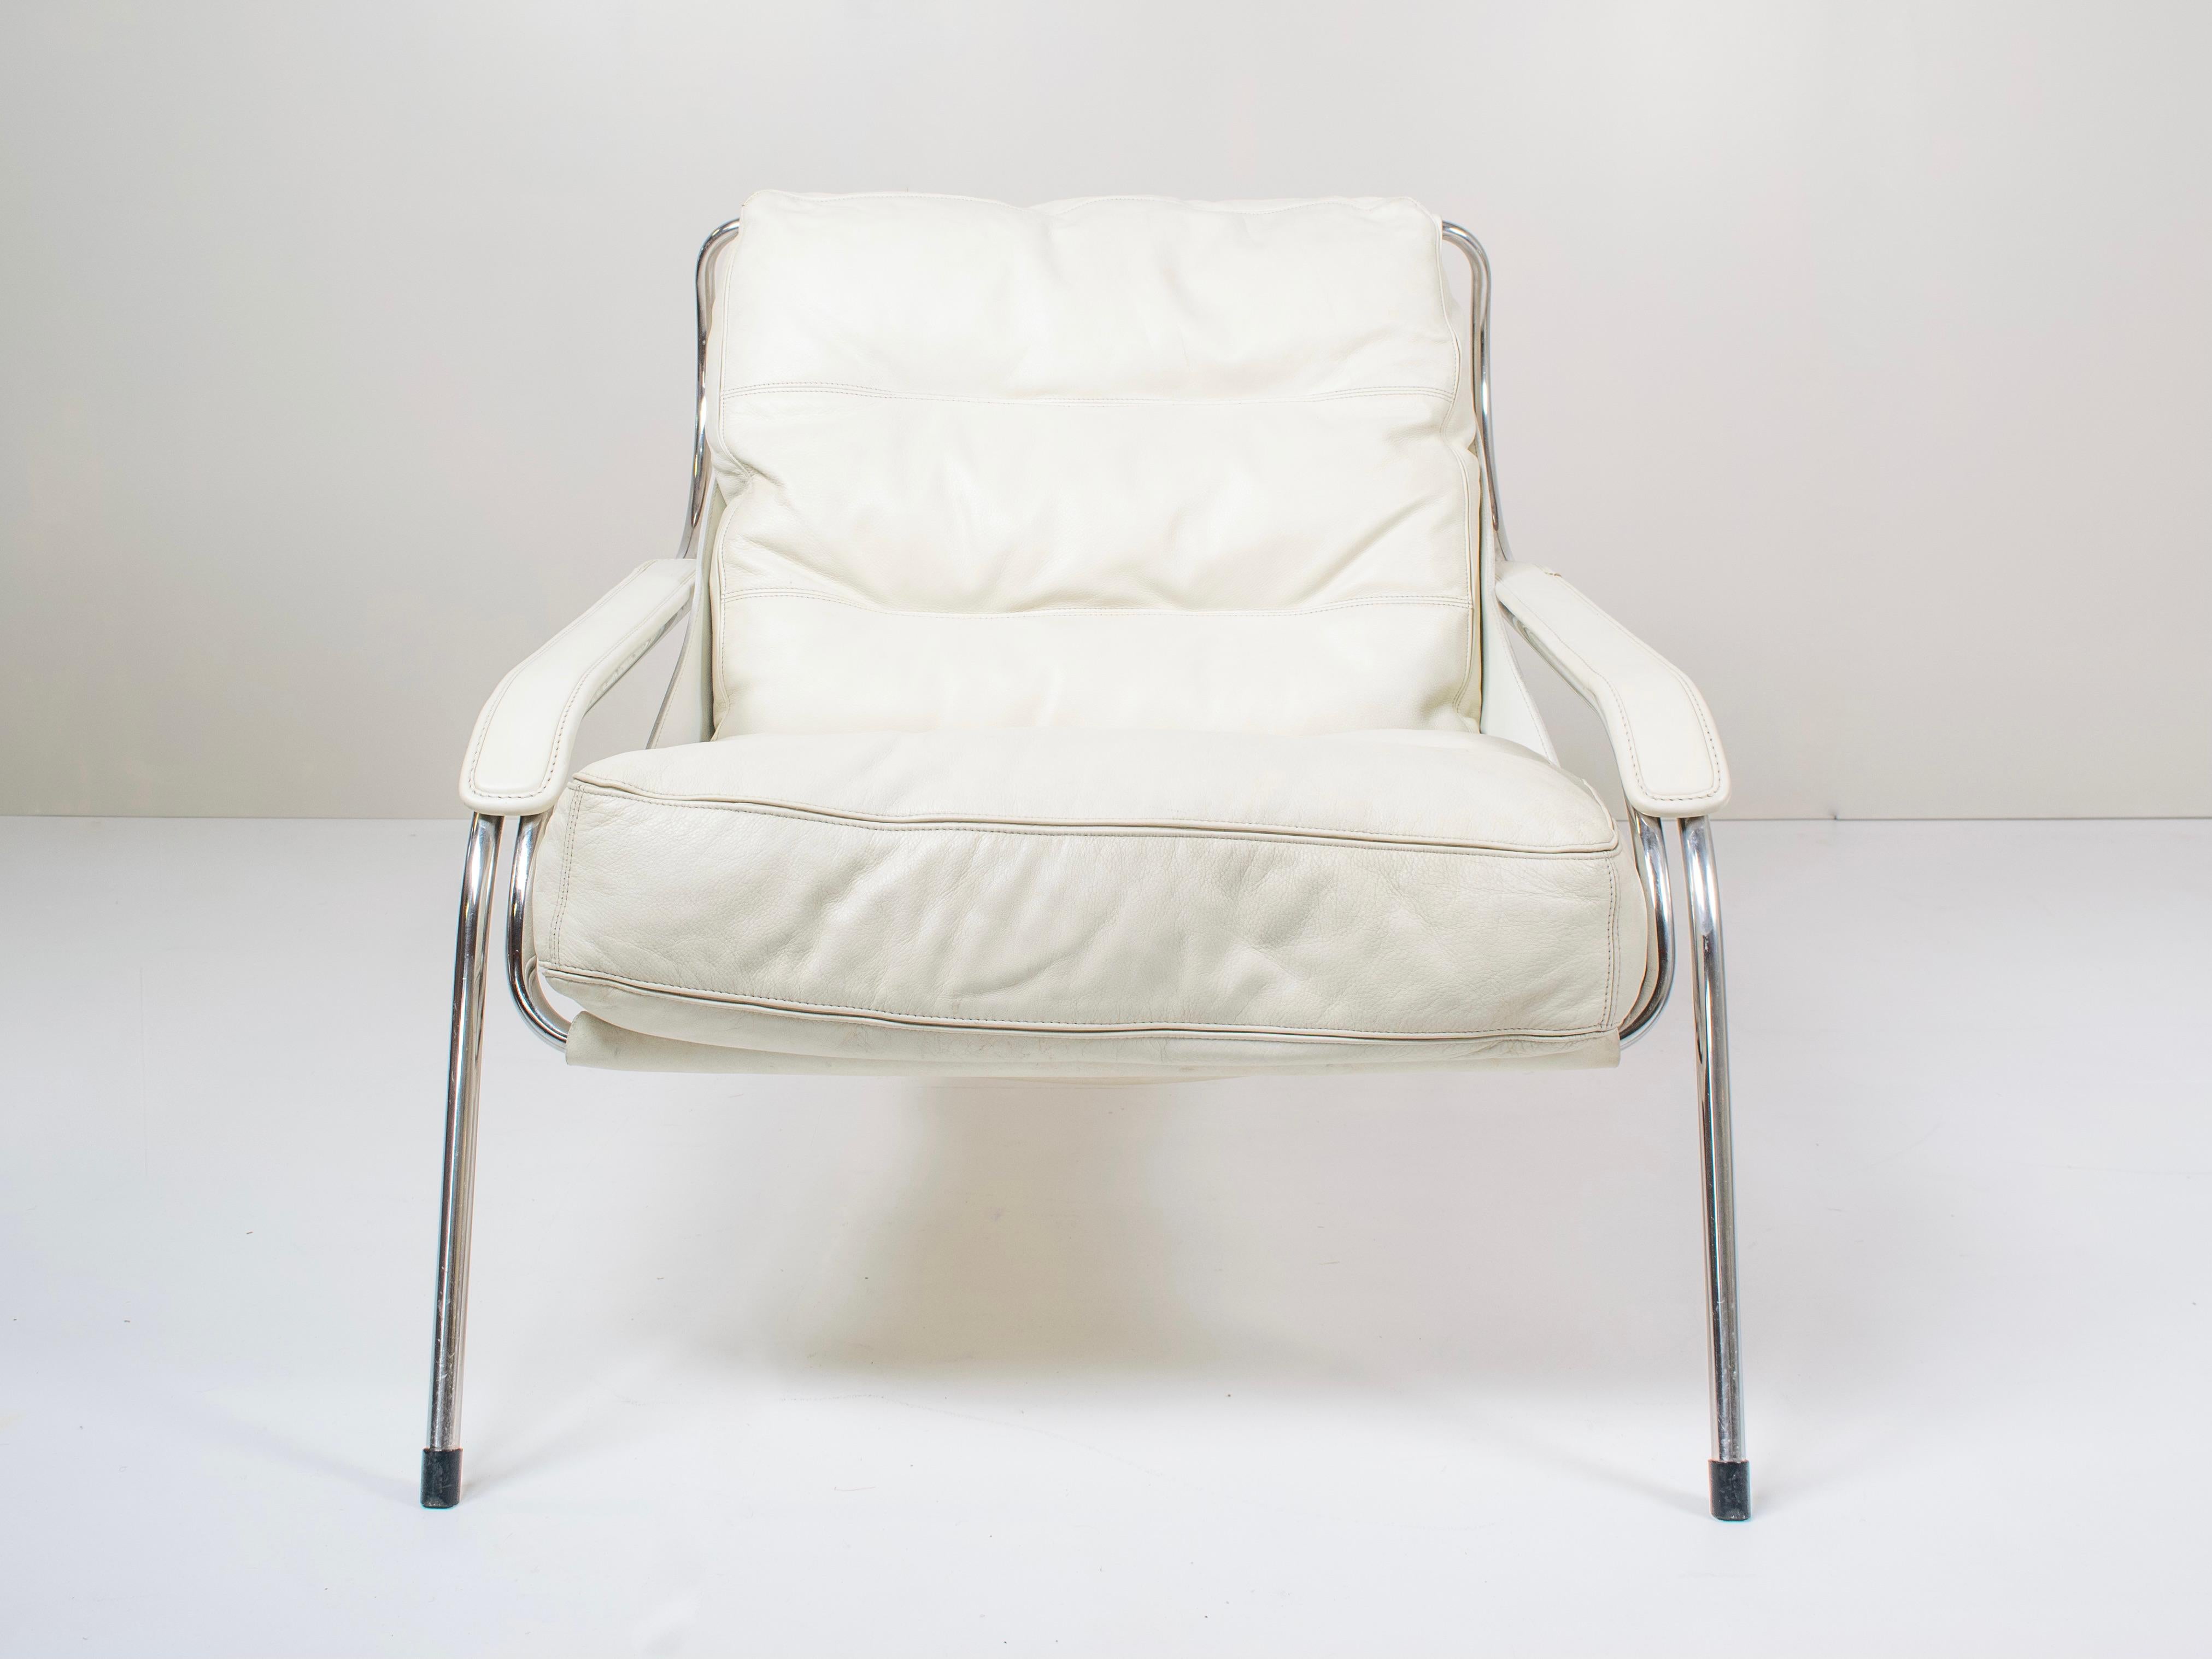 Pair of Marco Zanuso Maggiolina White Leather Chairs by Zanotta, Italy, 1947 2